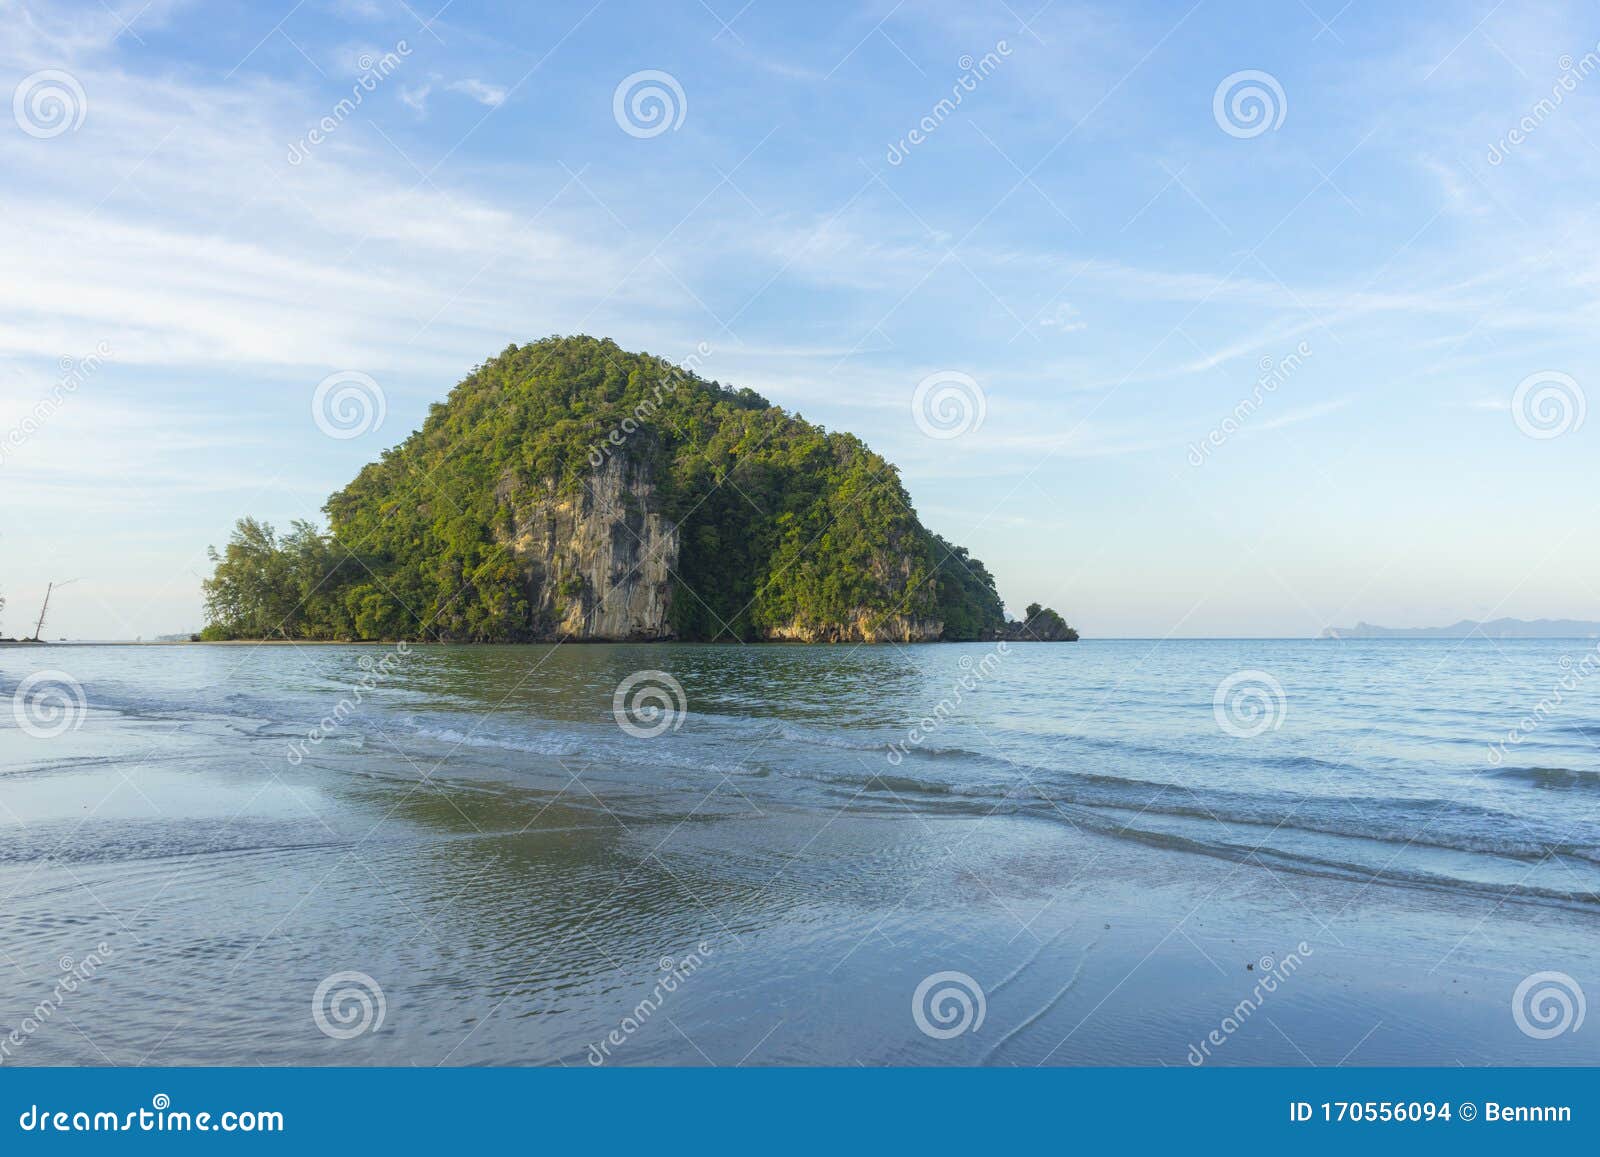 job Embankment hydrogen Light Blue Sky and Islands in the Background at Hat Chao Mai National Park,  Trang Stock Photo - Image of shore, green: 170556094